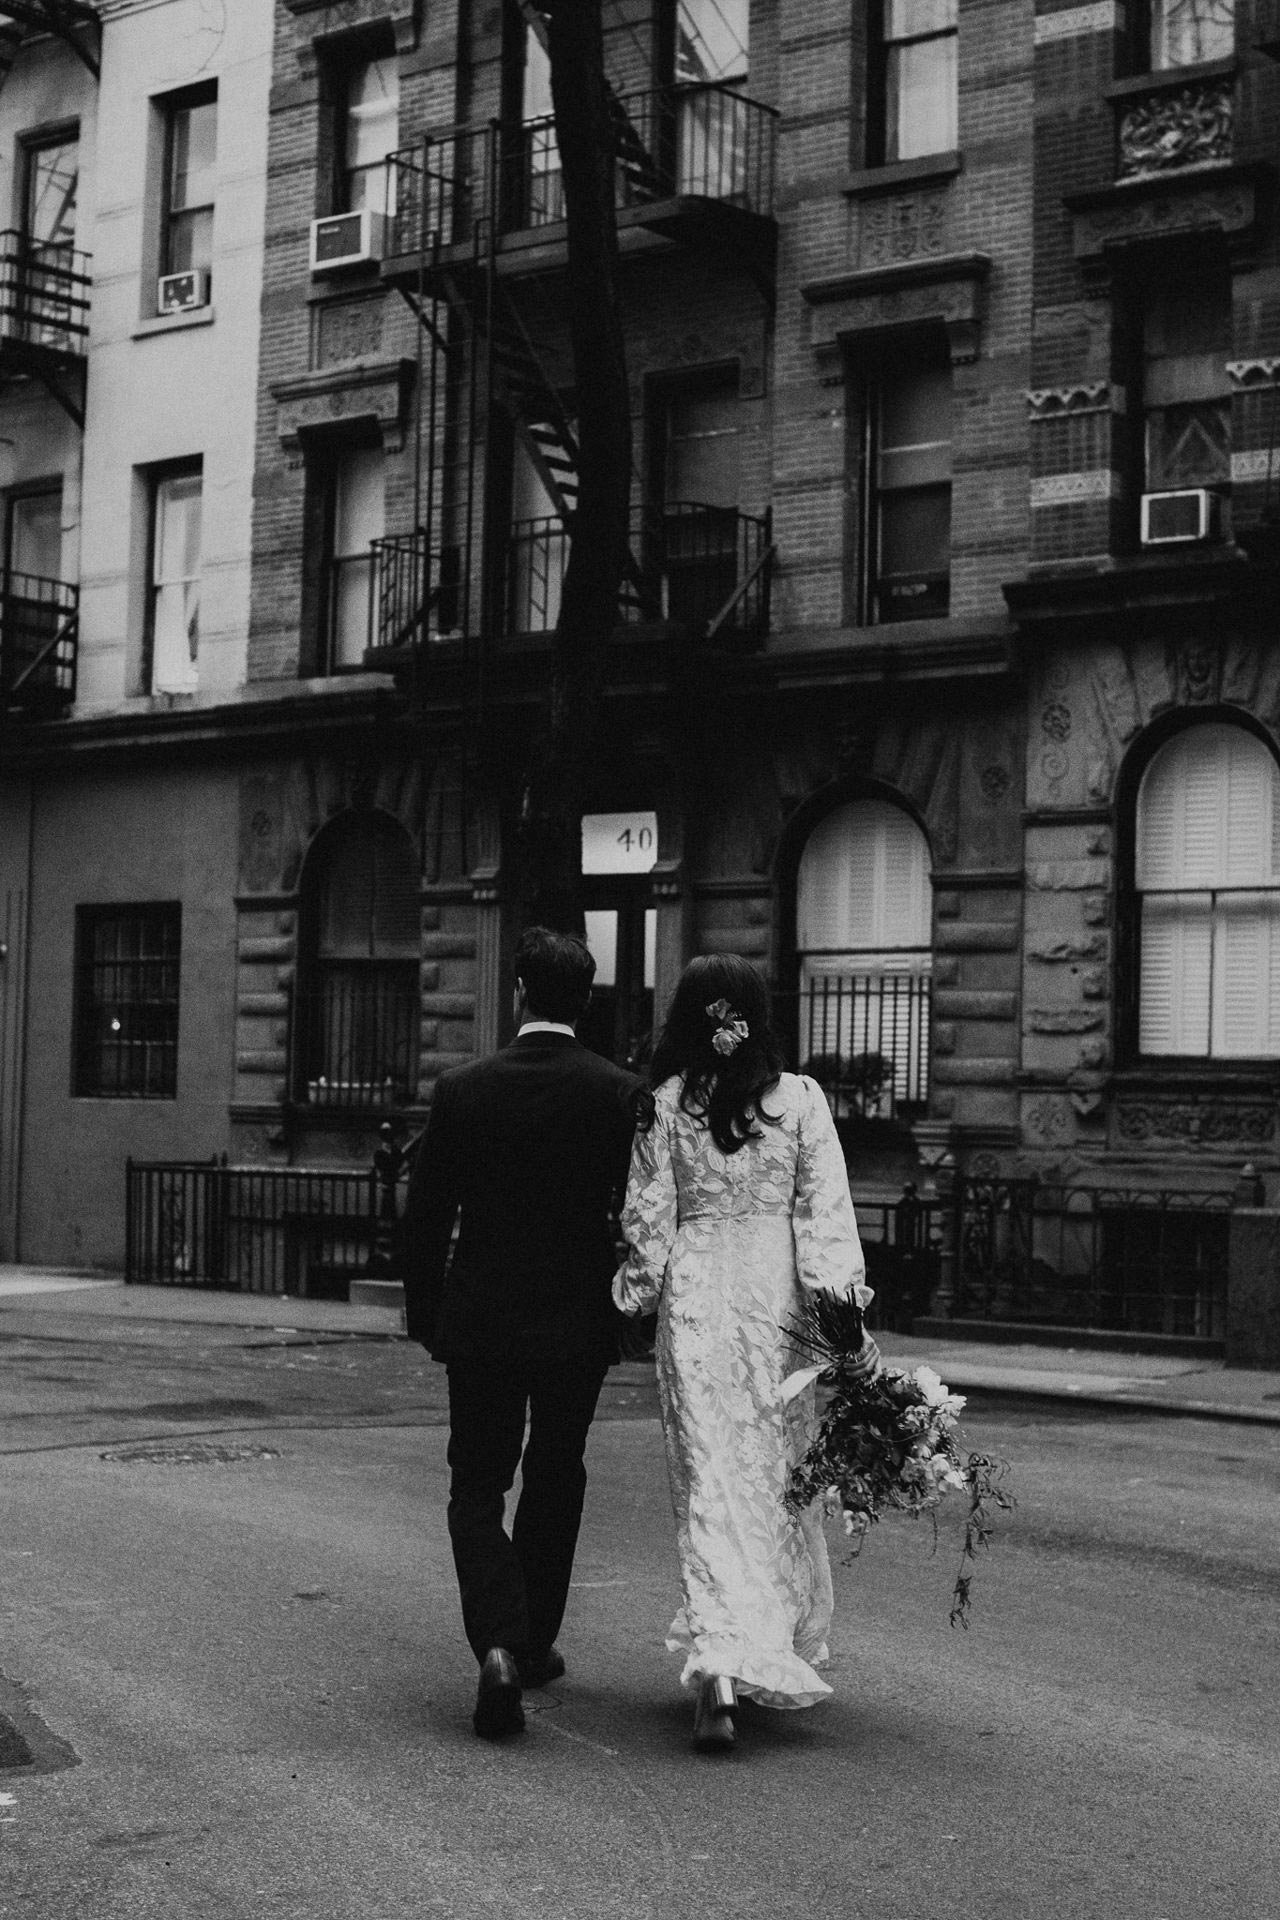 Intimate Weddings - Sylvie Rosokoff | NYC Photography | Elopements ...